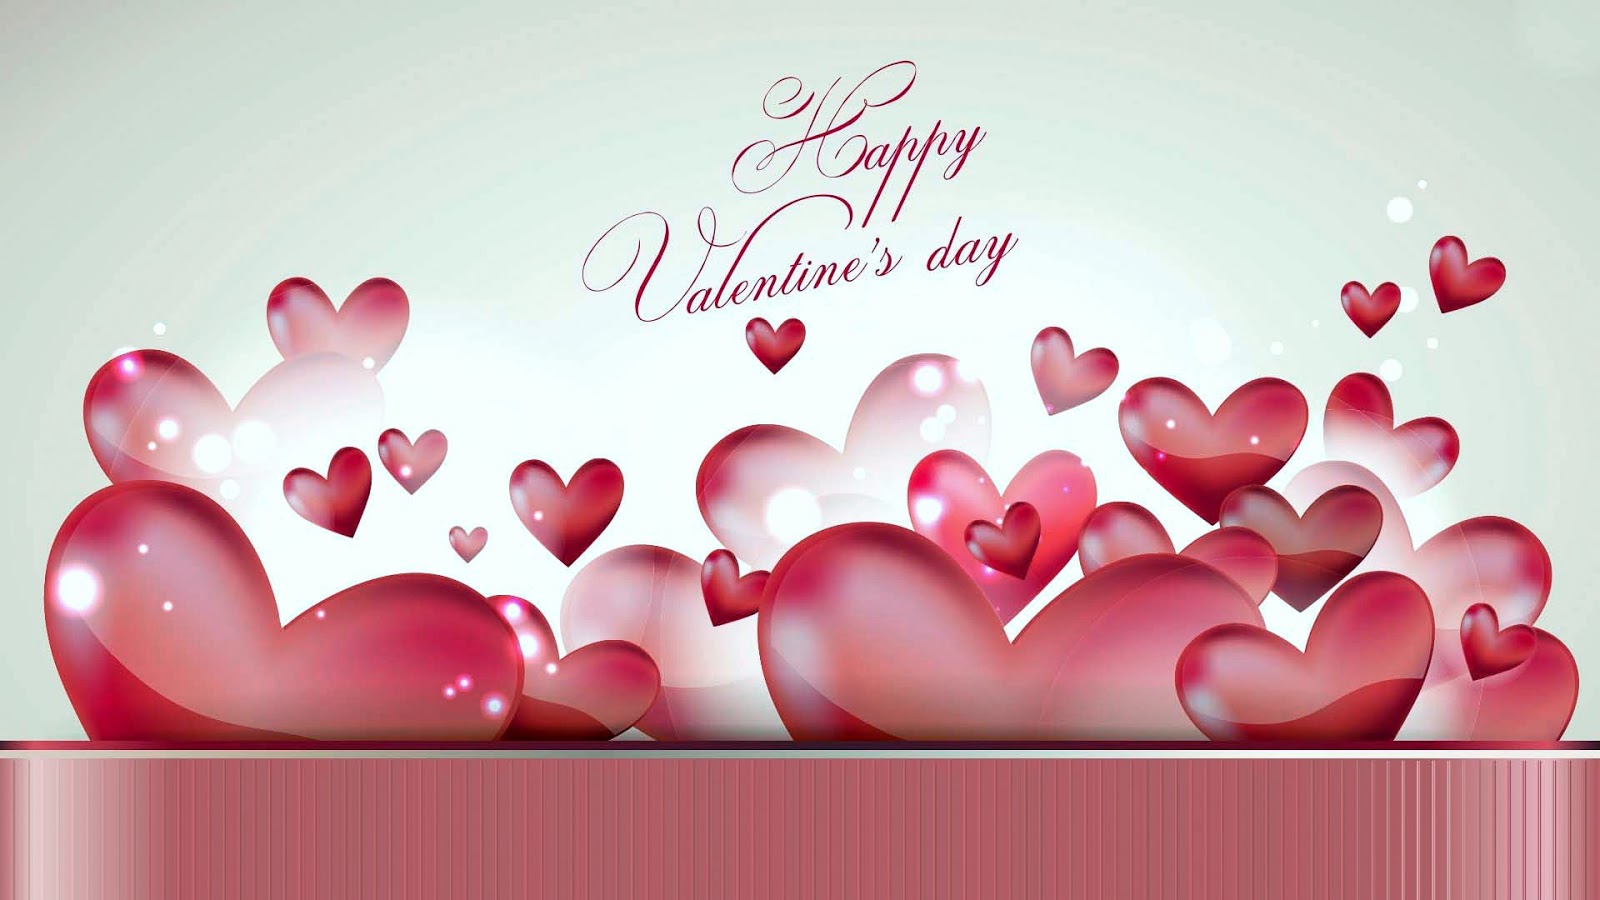 14th February Valentines Day Wishing Cards Image Pictures Biseworld